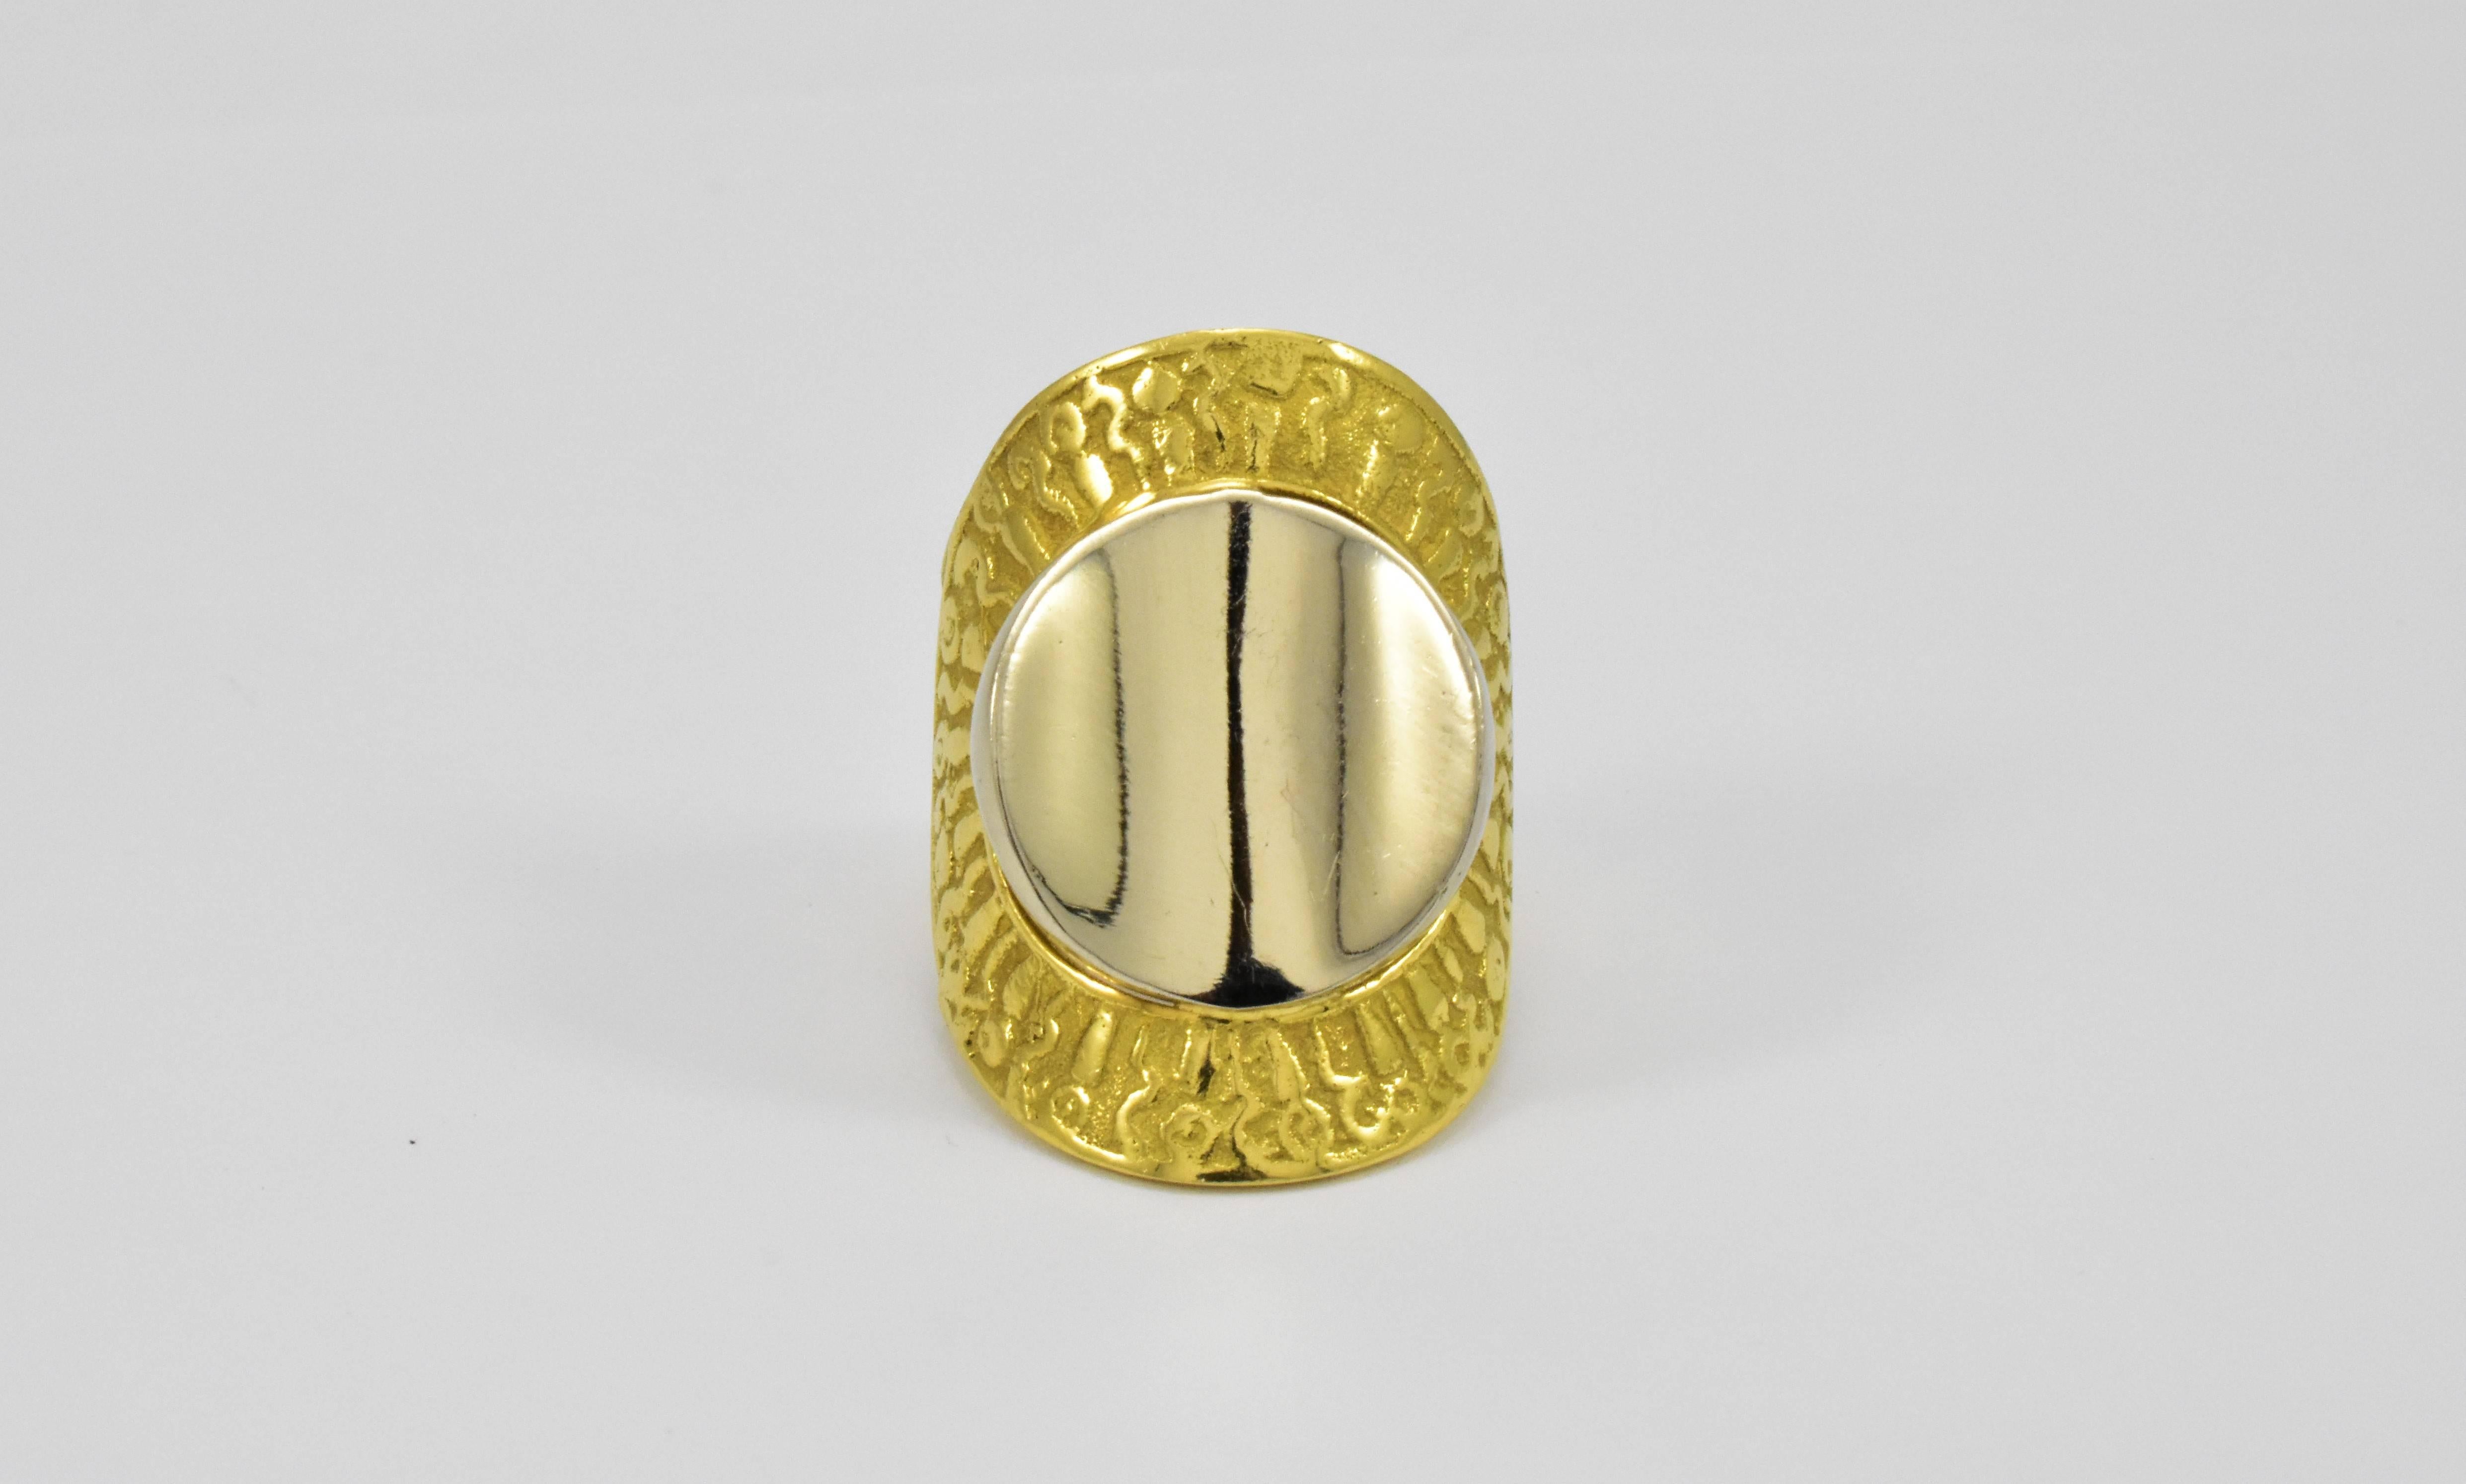 A large two tone white and yellow gold Greek revival style contemporary ring from 1970s. The ring features a central highly polished reflective concave white gold disc floating within yellow gold halo which has greek symbols details encircling the